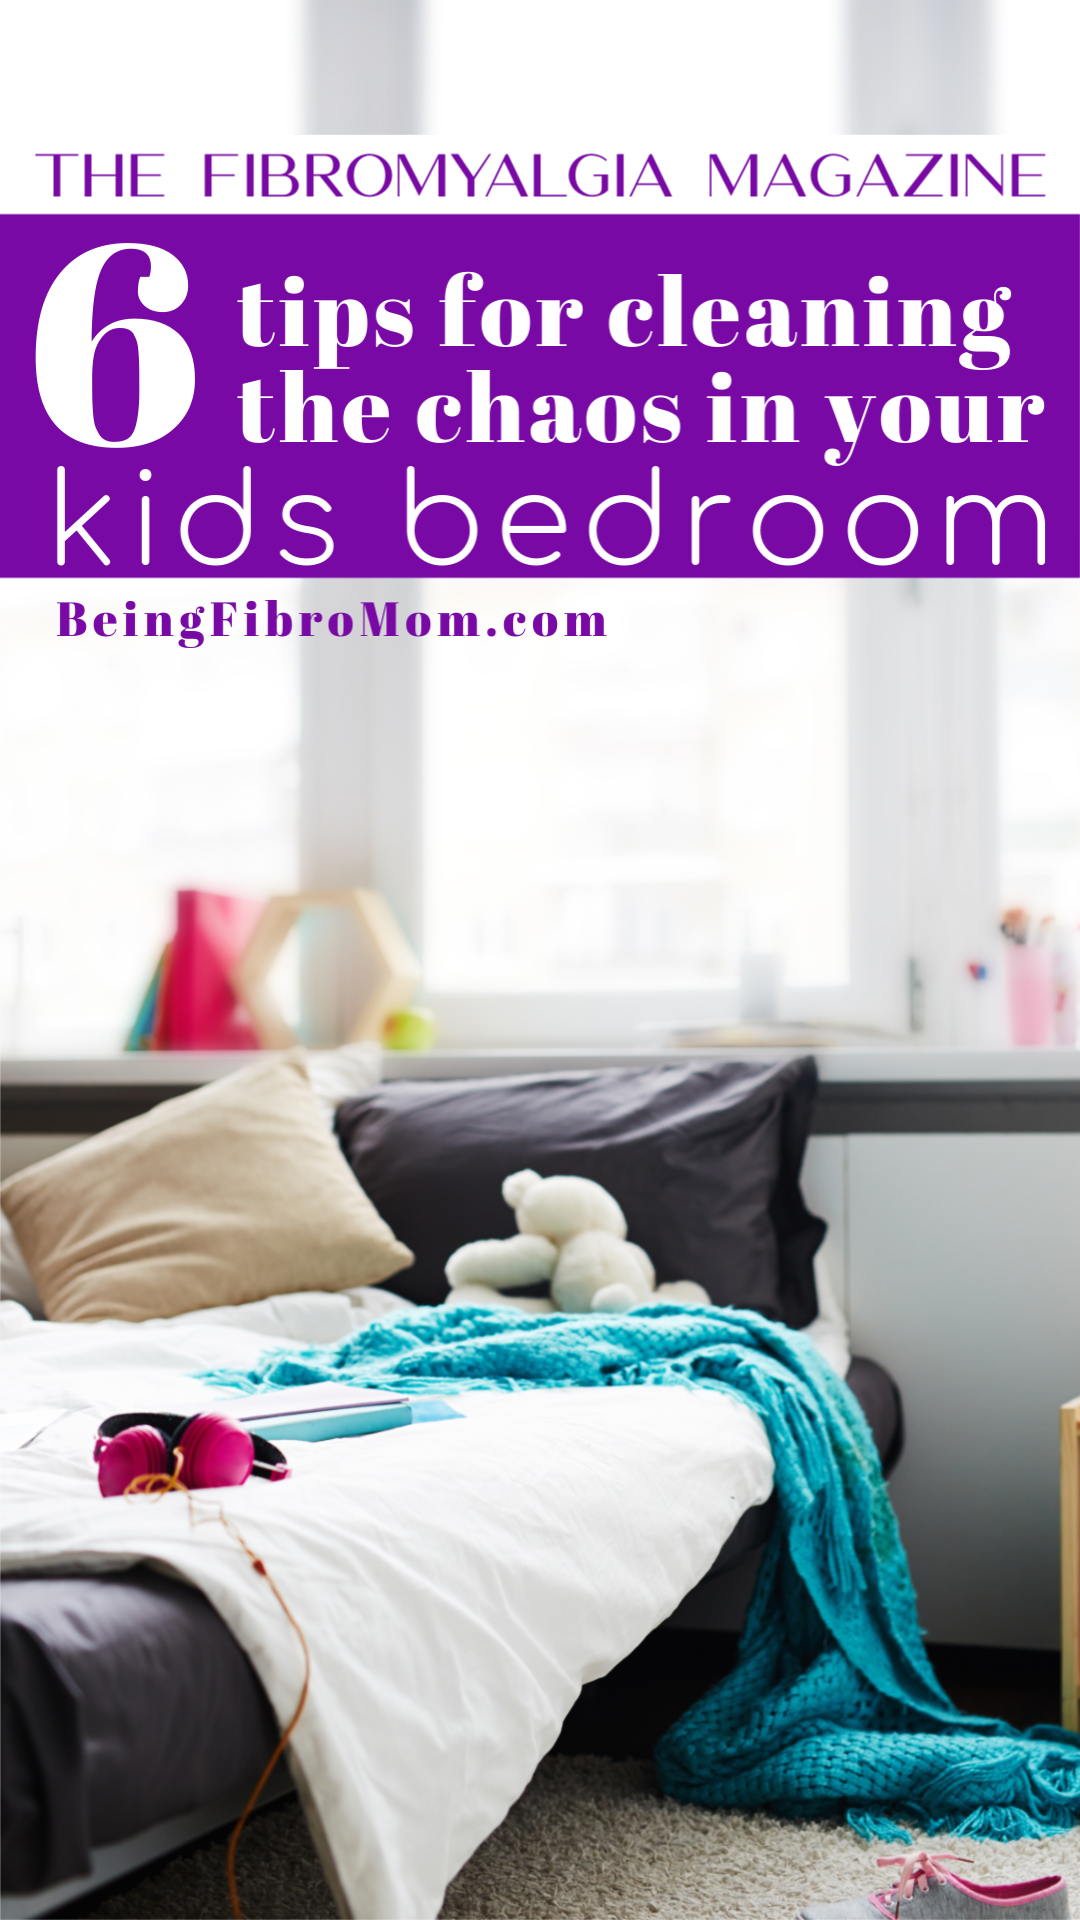 six tips for cleaning the chaos in your kids bedrooms #beingfibromom #fibroparenting #thefibromyalgiamagazine #fibromyalgia